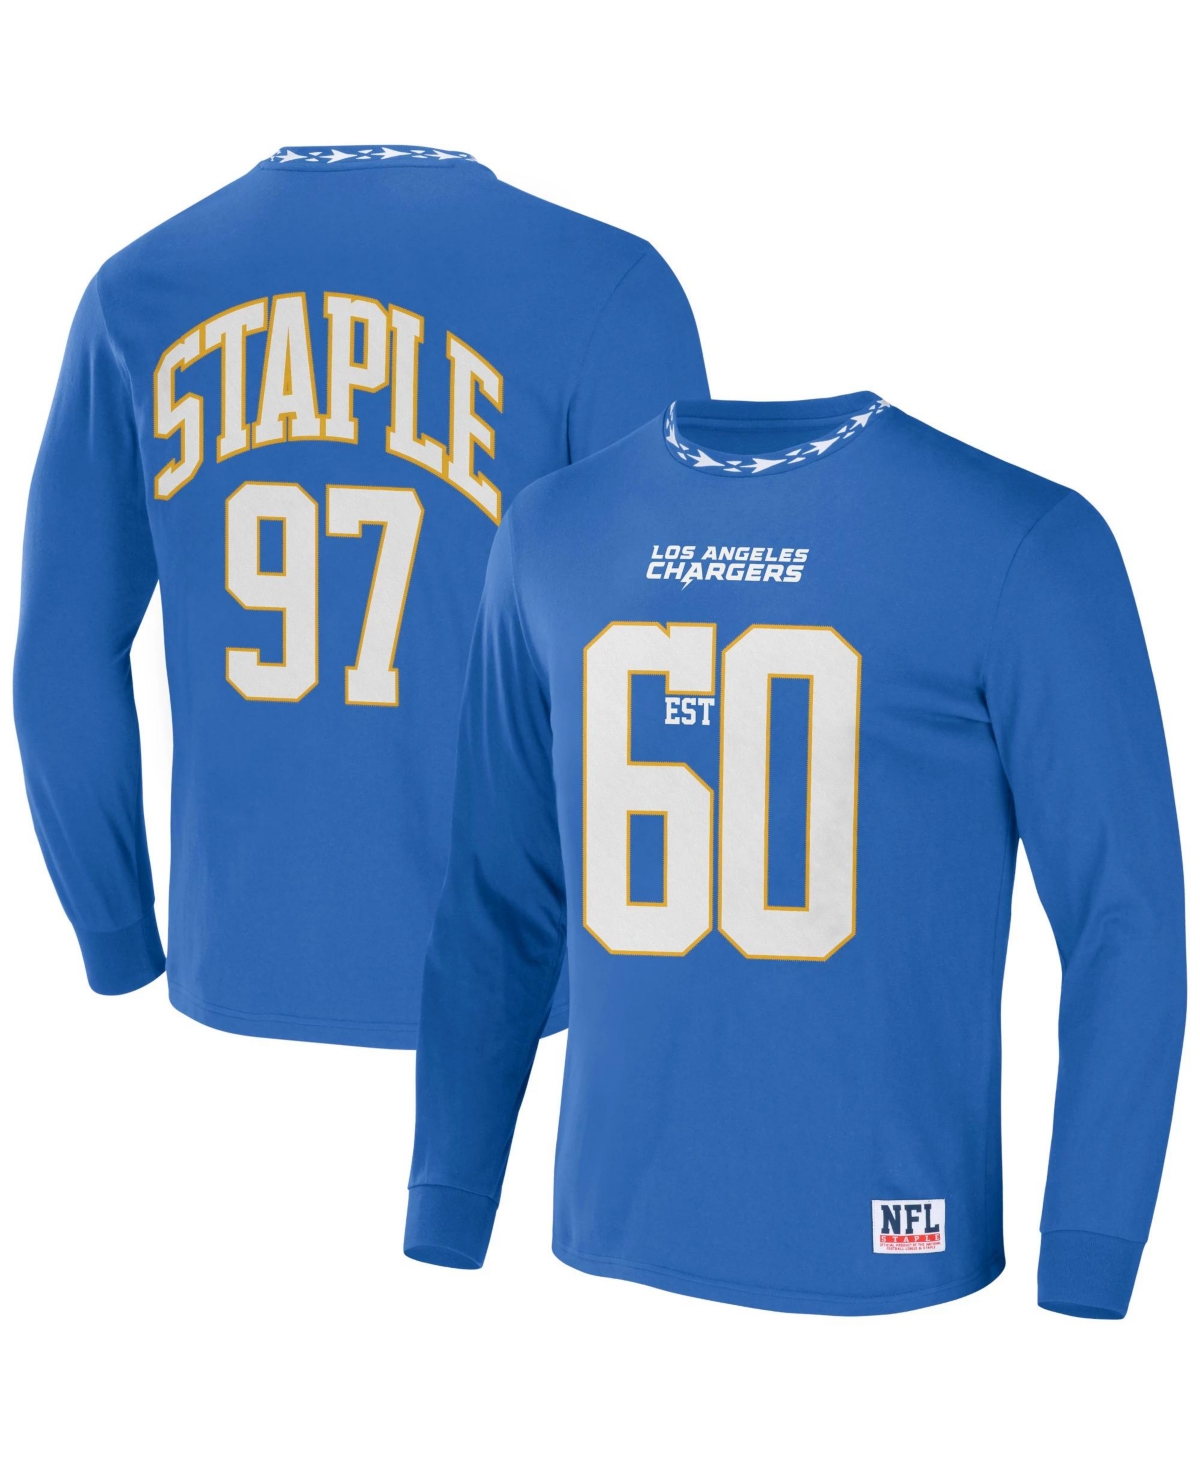 Men's Nfl X Staple Blue Los Angeles Chargers Core Long Sleeve Jersey Style T-shirt - Blue